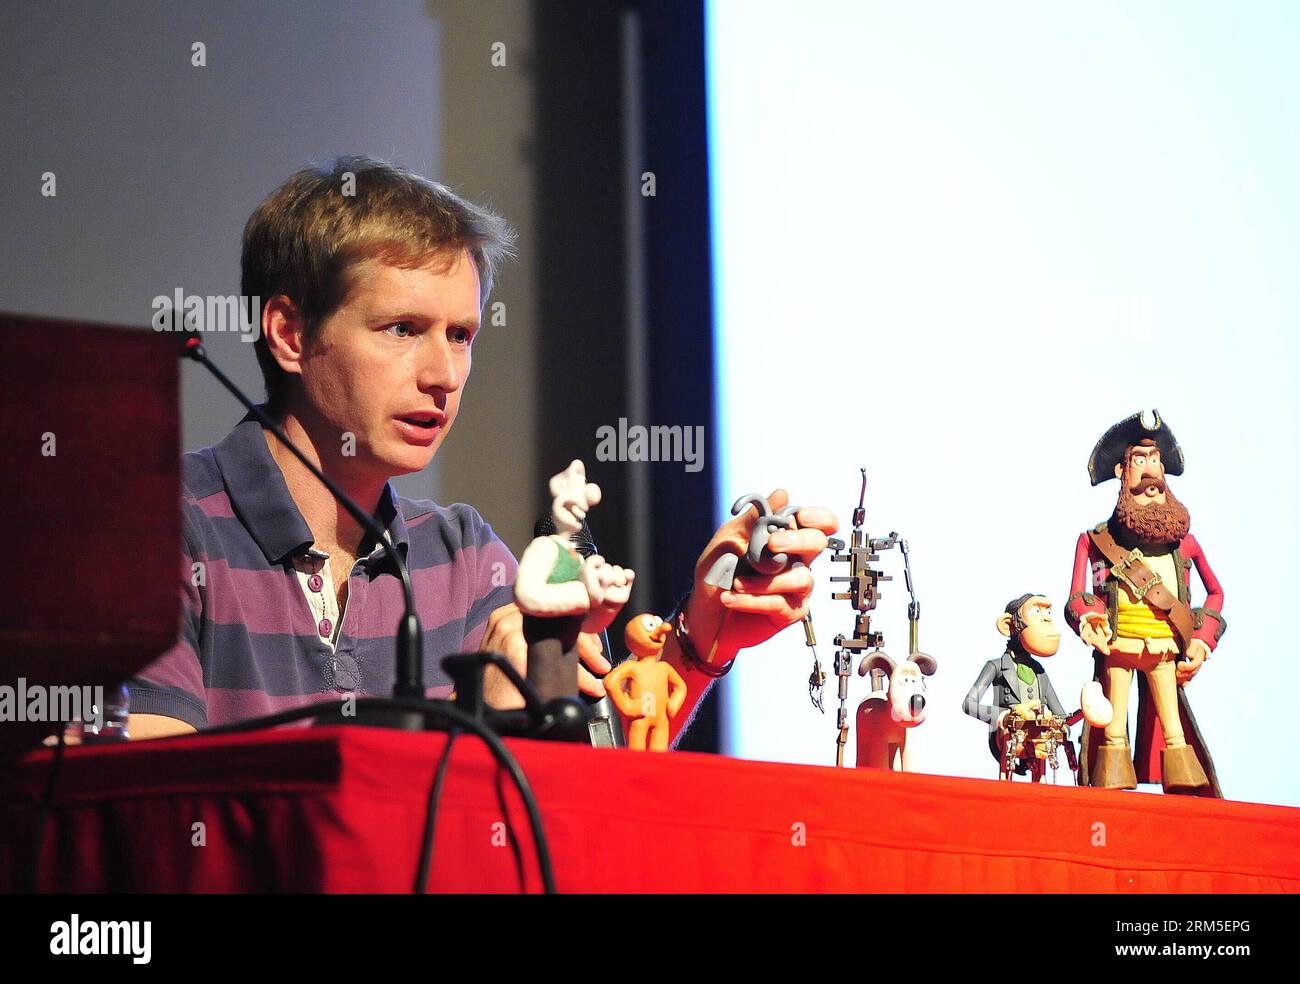 Bildnummer: 60641592  Datum: 26.10.2013  Copyright: imago/Xinhua (131026) -- BEIJING, Oct. 26, 2013 (Xinhua) -- Merlin Crossingham, creative director for Wallace & Gromit, Aardman Animations in Britain, introduces making stop-motion animation at the 8th China International Student Animation Festival in Beijing, capital of China, Oct. 26, 2013. The three-day festival kicked off at the Communication University of China Saturday. (Xinhua/Xiao Xiao)(wjq) CHINA-BEIJING-STUDENT ANIMATION FESTIVAL (CN) PUBLICATIONxNOTxINxCHN People x0x xsk 2013 quer      60641592 Date 26 10 2013 Copyright Imago XINHU Stock Photo